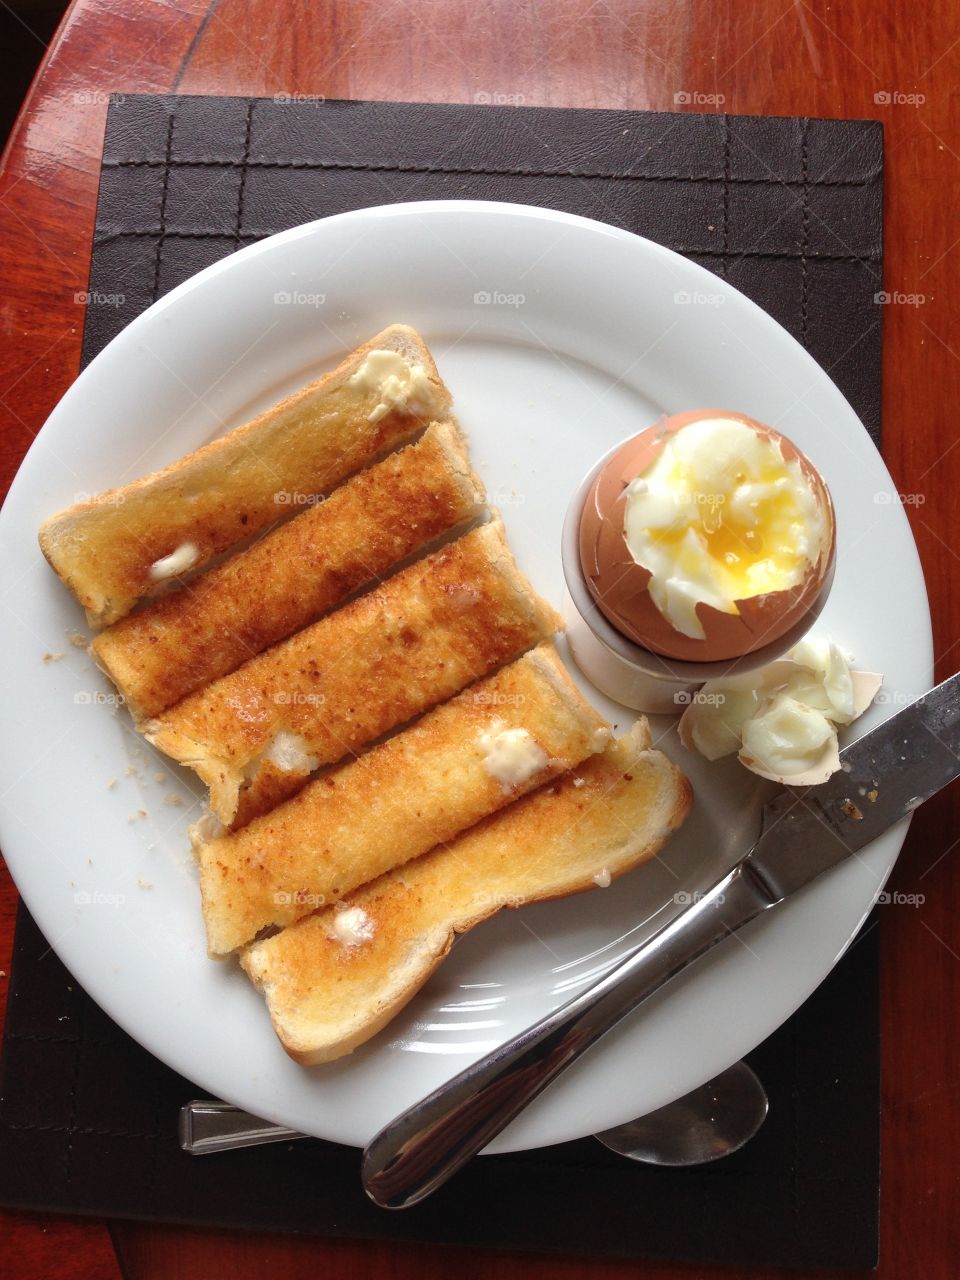 Boiled egg & soldiers. Boiled egg & soldiers